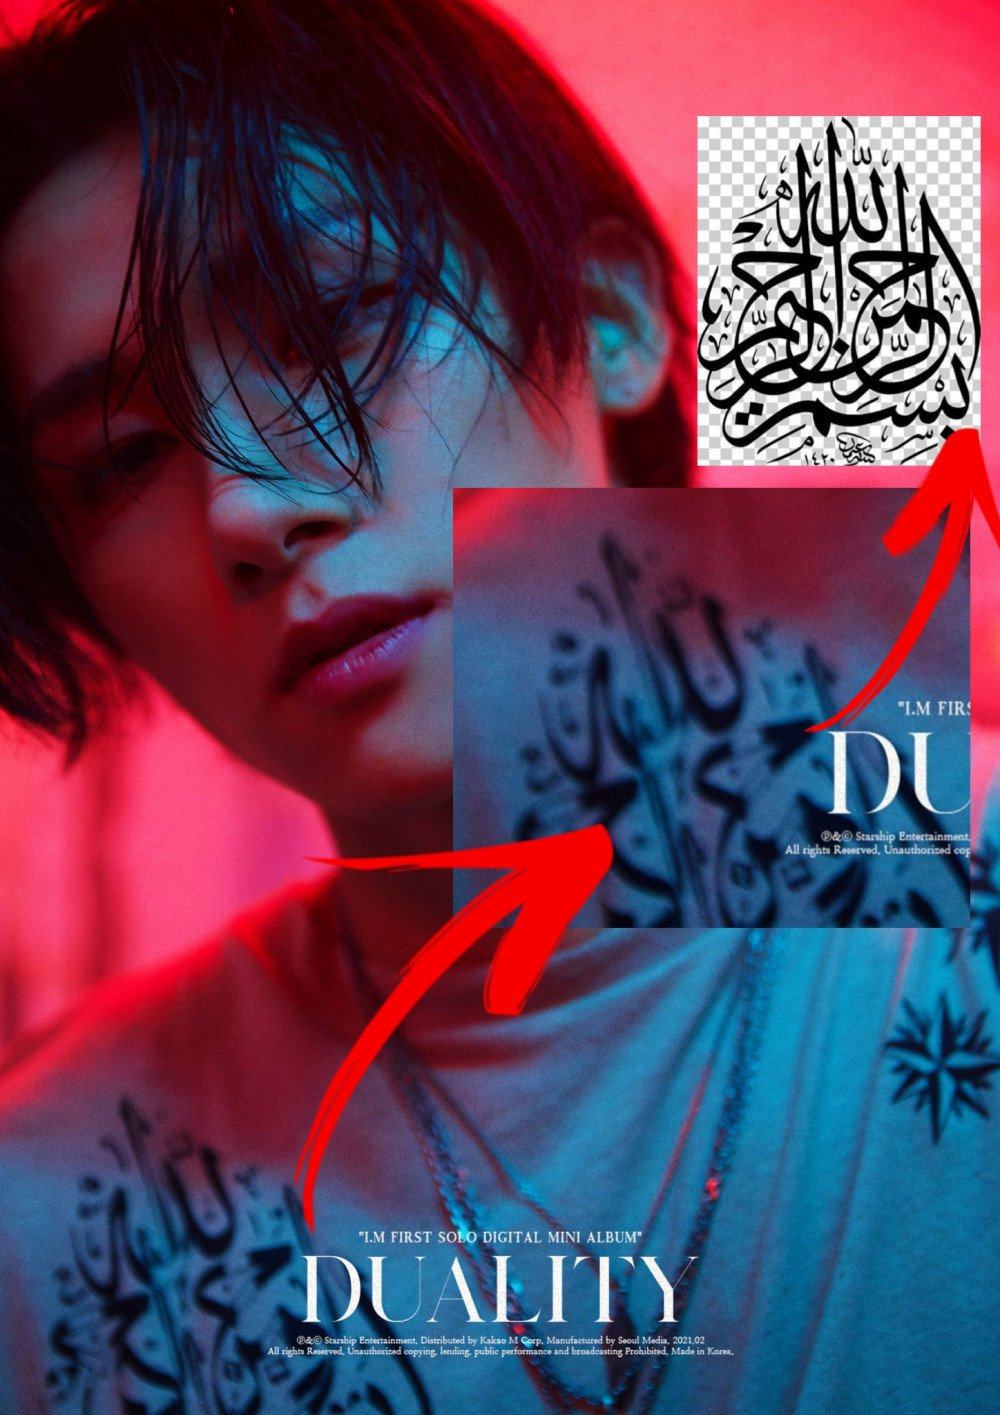 Monsta X member I.M had to apologise for using the word Allah in promo photos for his new album.
